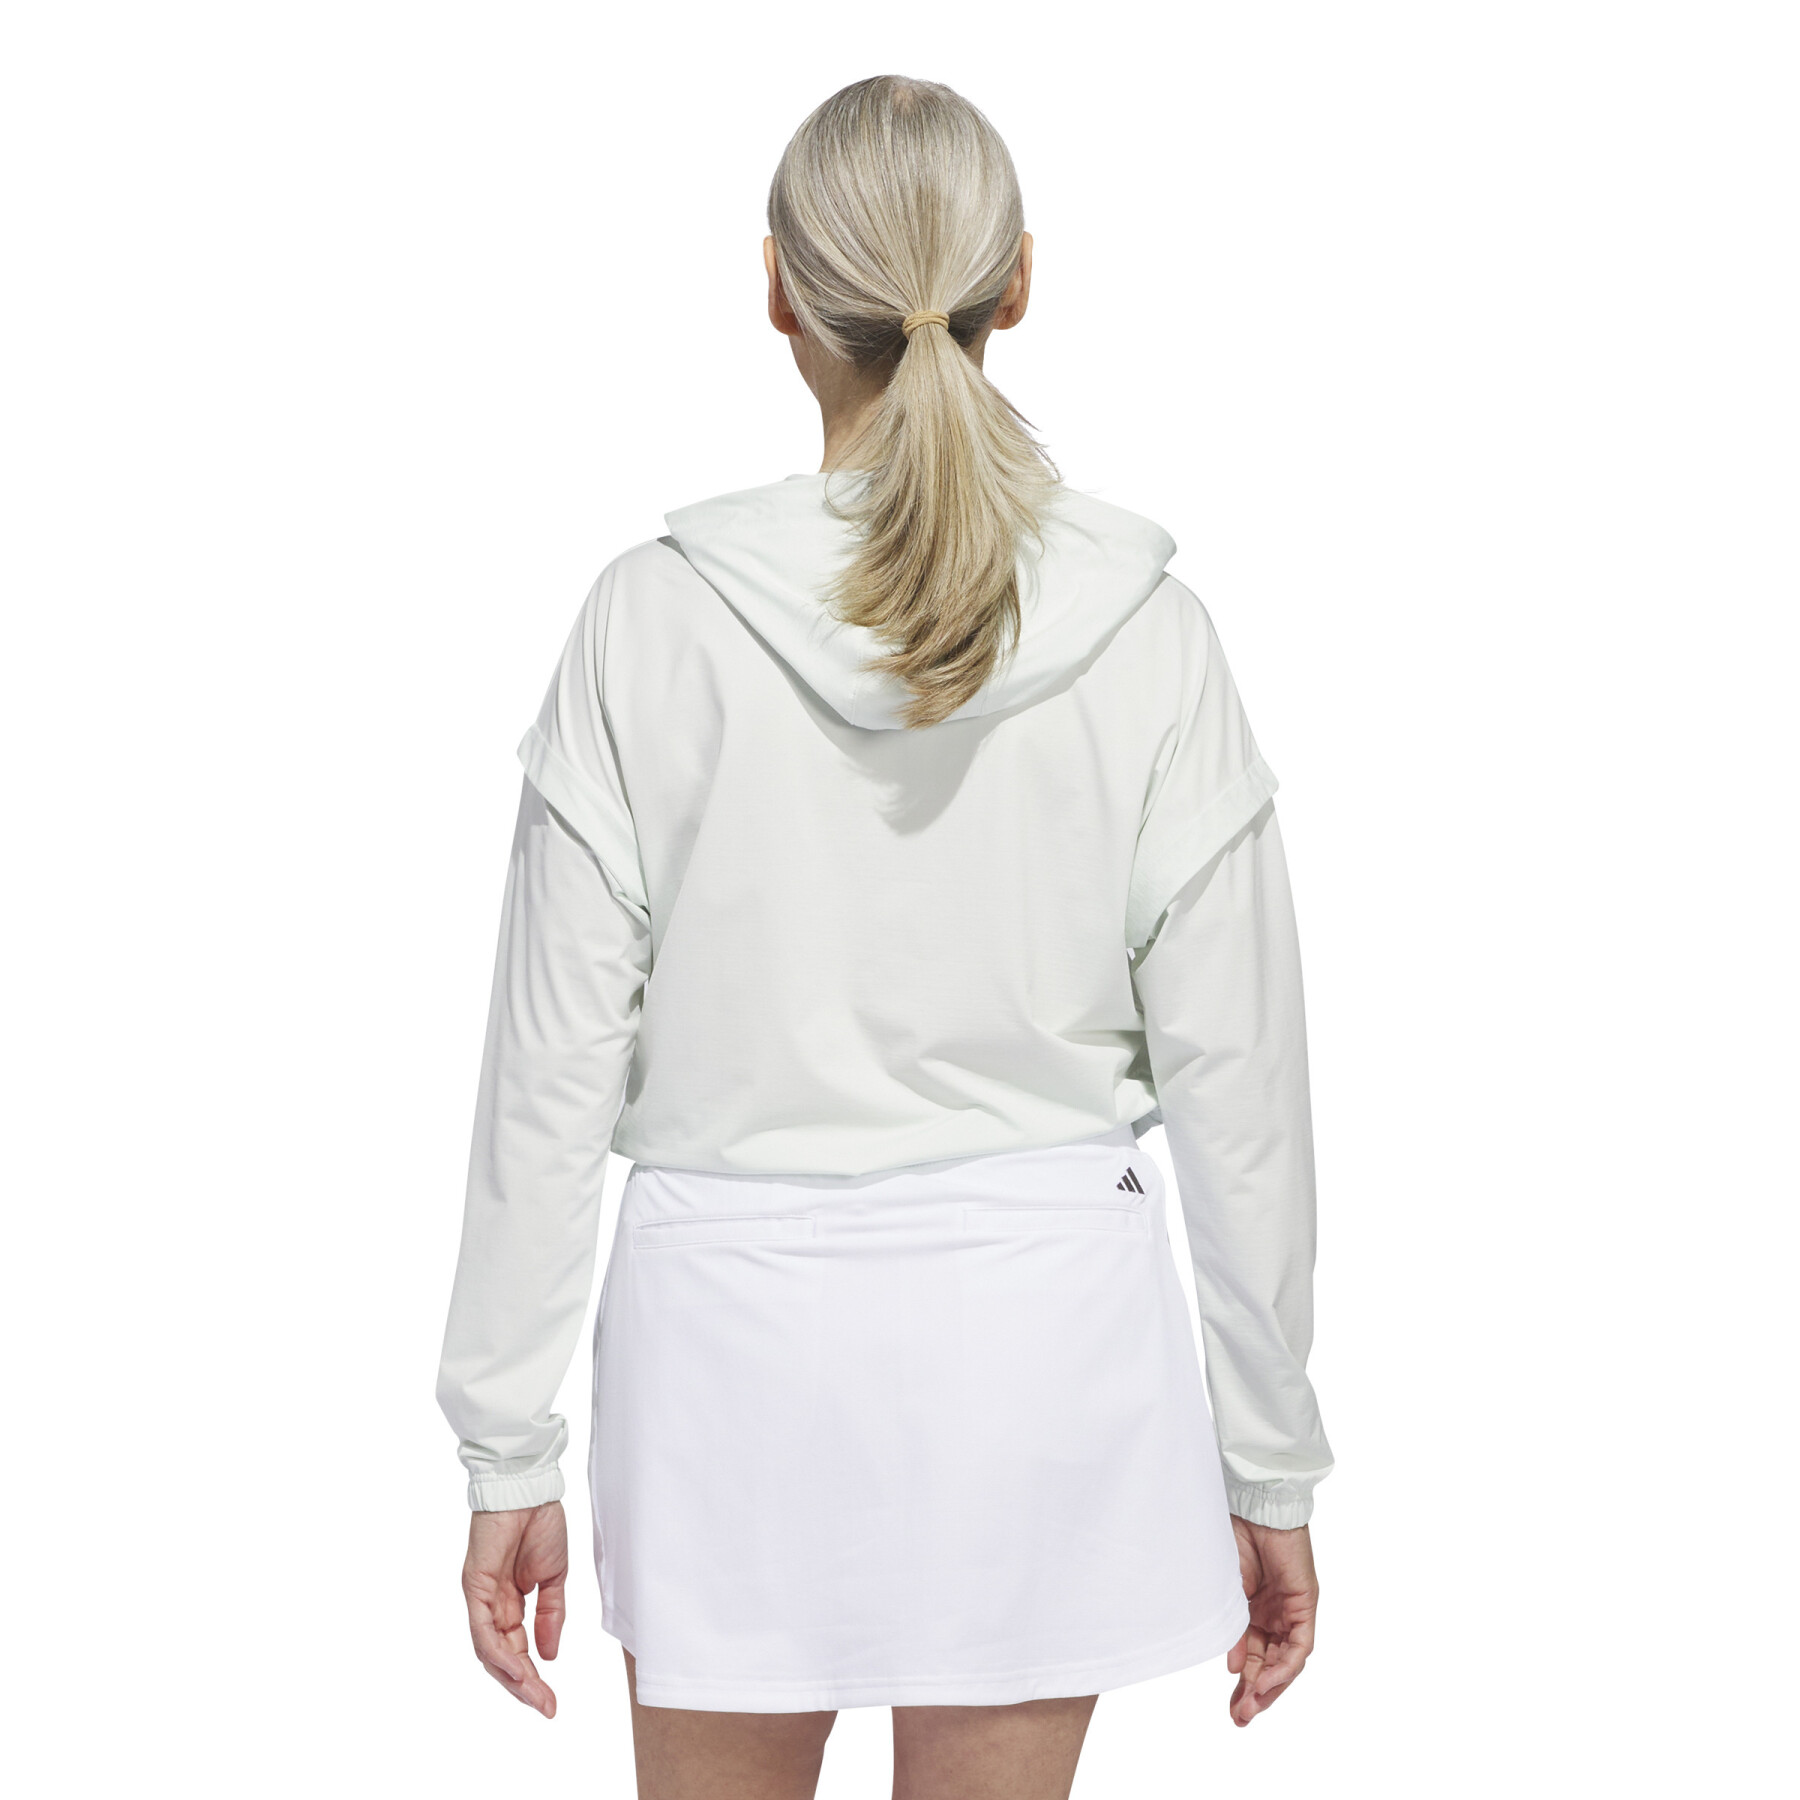 Women's cable knit hooded sweatshirt adidas Ultimate365